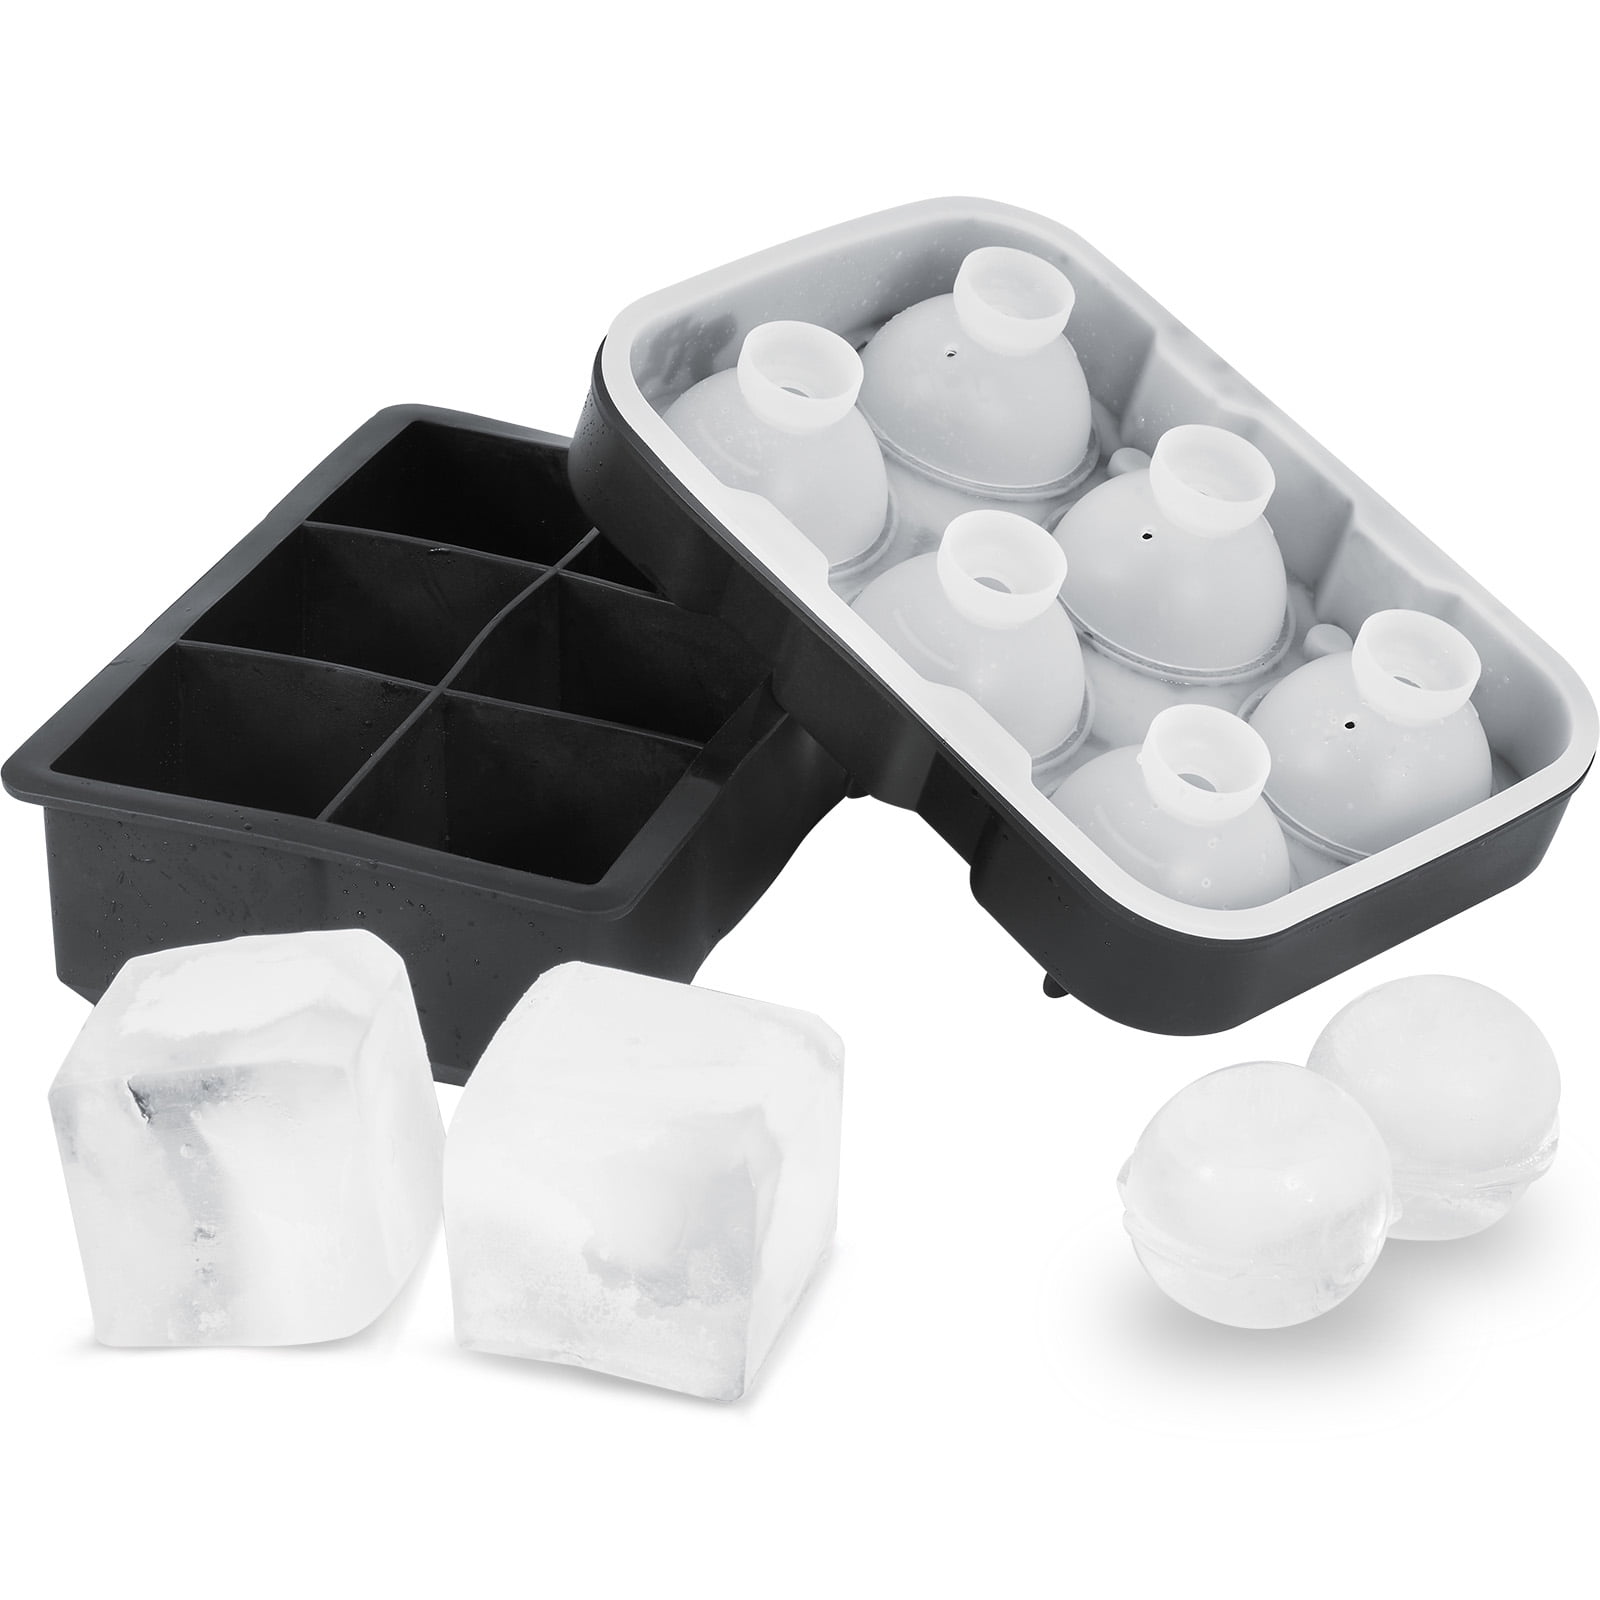 VEVOR Ice Ball Maker, Crystal Clear Ice Ball Maker 2.36inch Ice Sphere  Maker with Storage Bag and Ice Clamp, Round Clear Ice Cube 2-Cavity Ice  Press